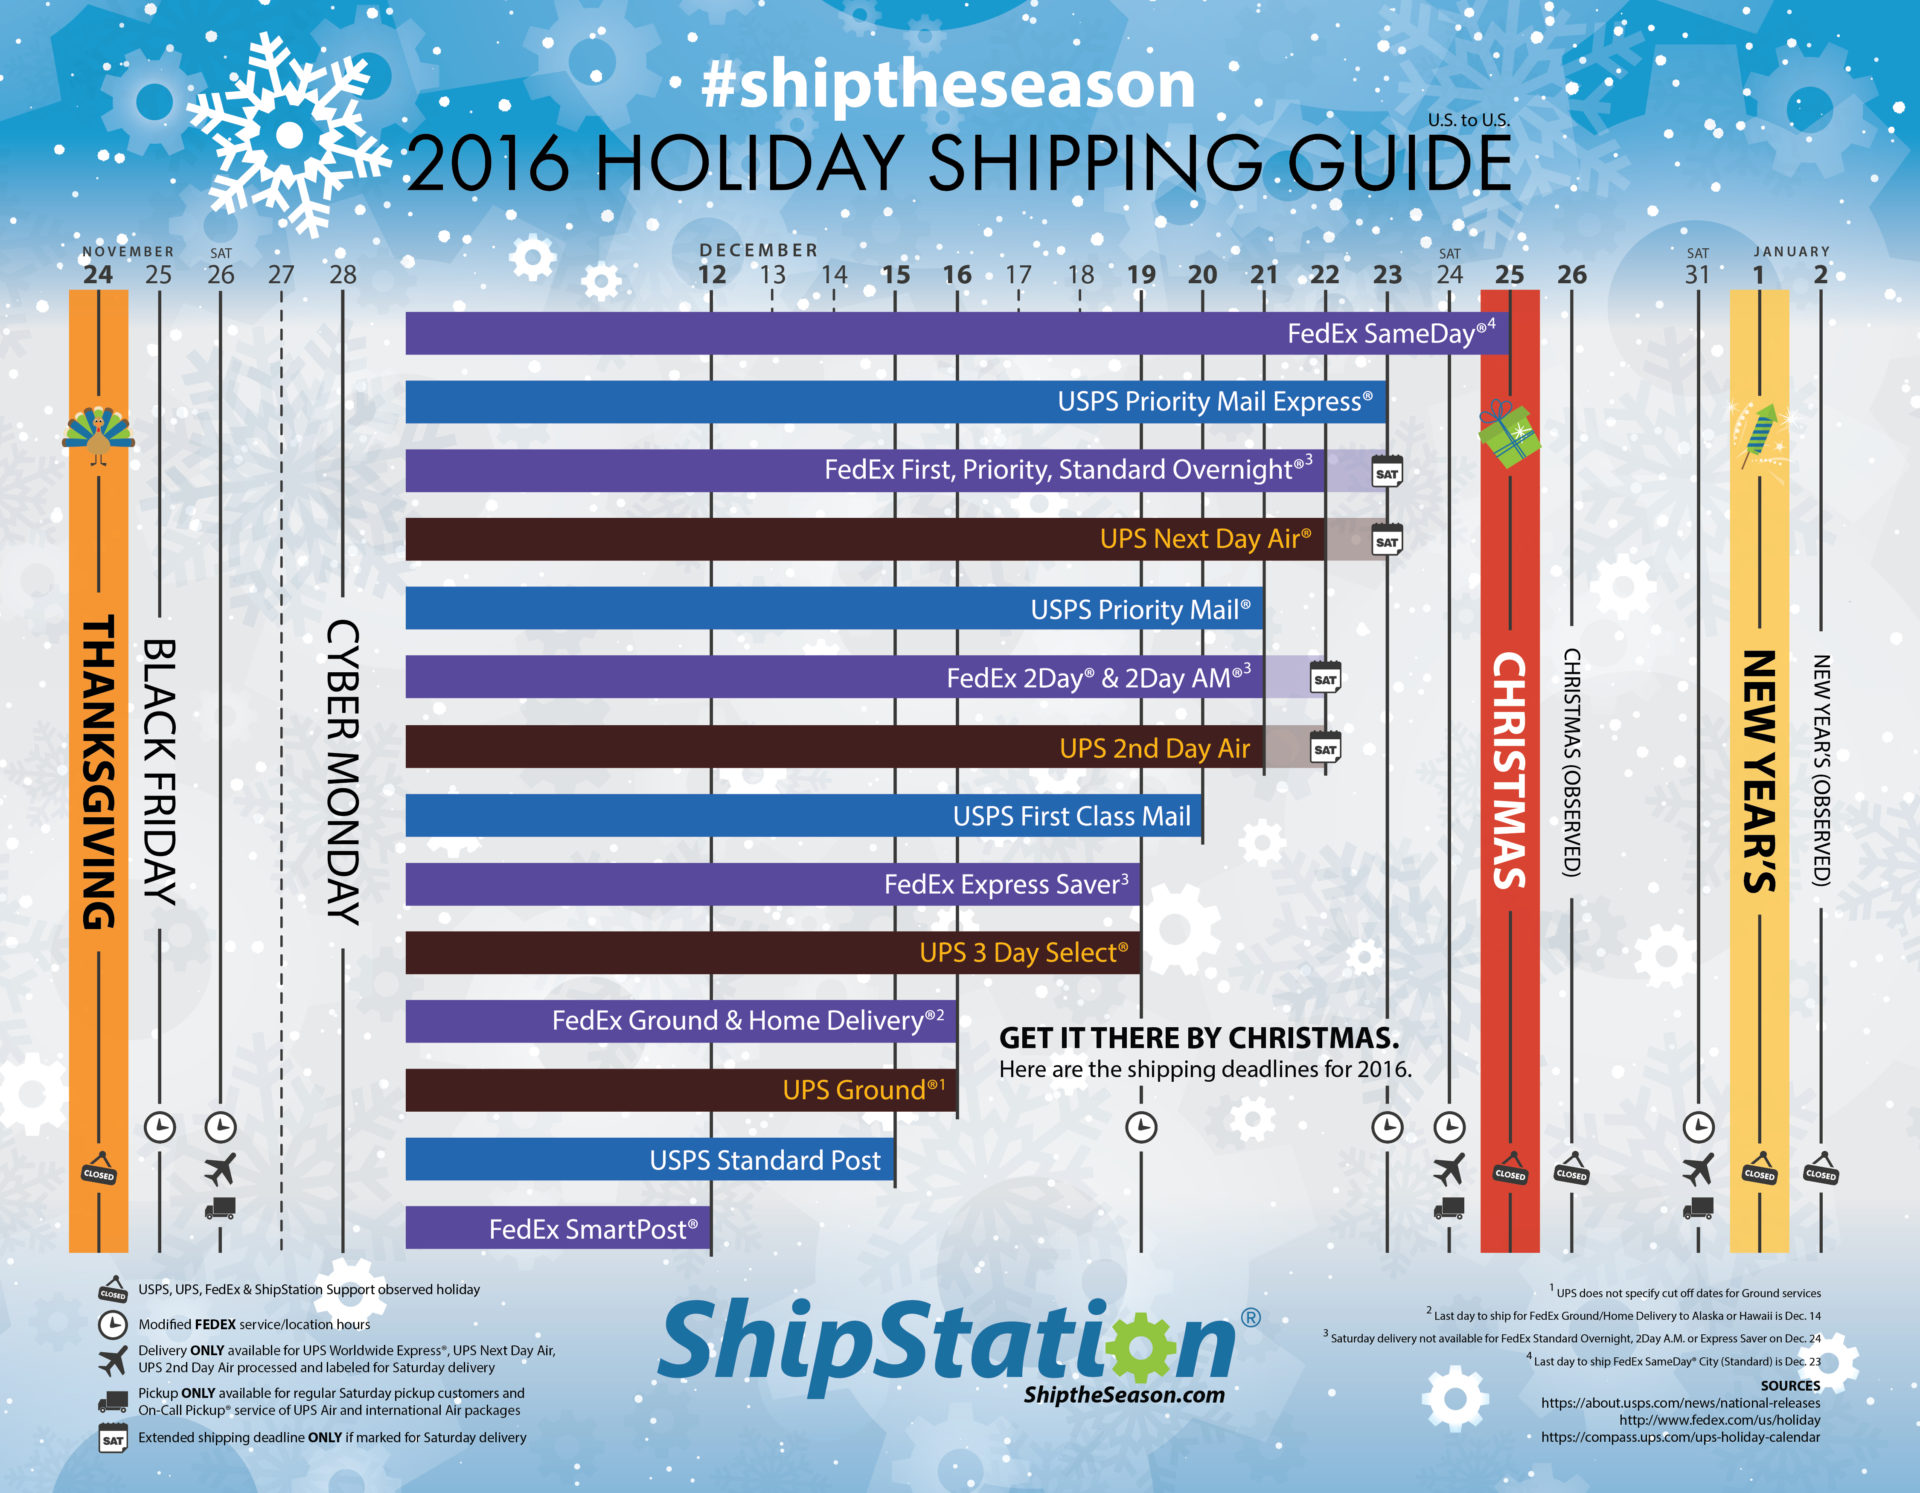 Your Guide to the 2016 Holiday Ship By Dates